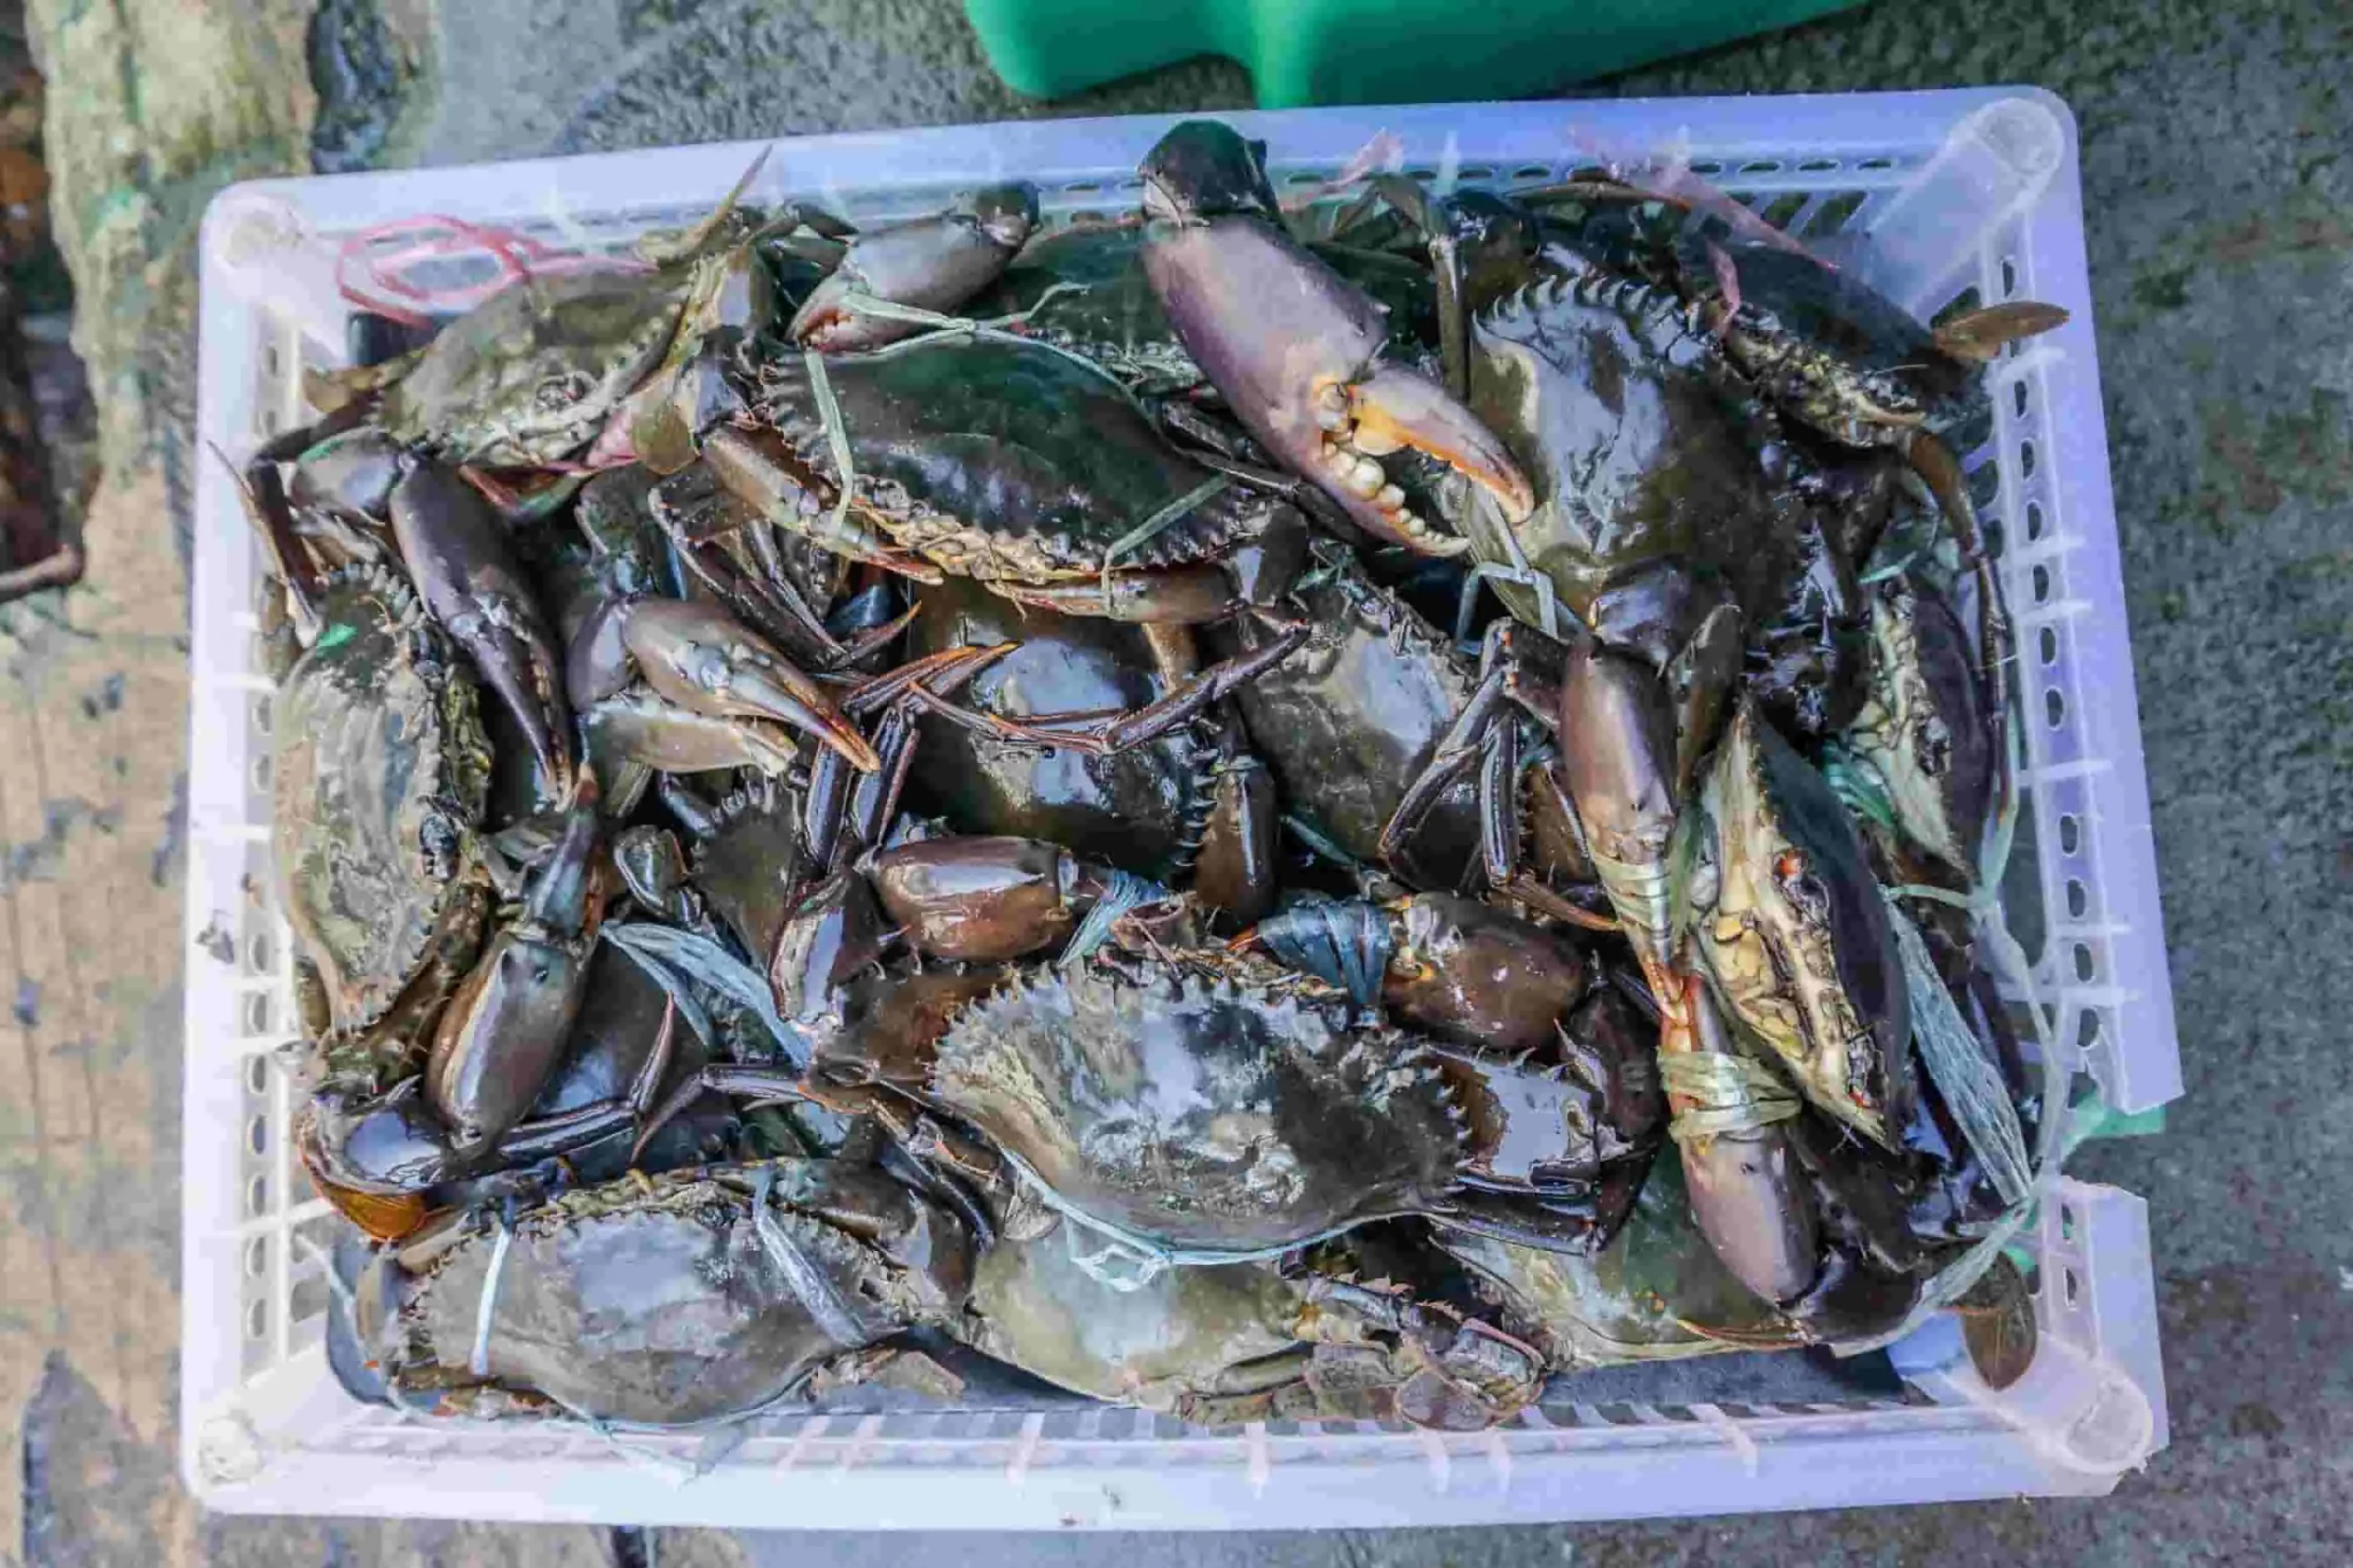 The Curious Case of the Crab Sub-sector of Bangladesh